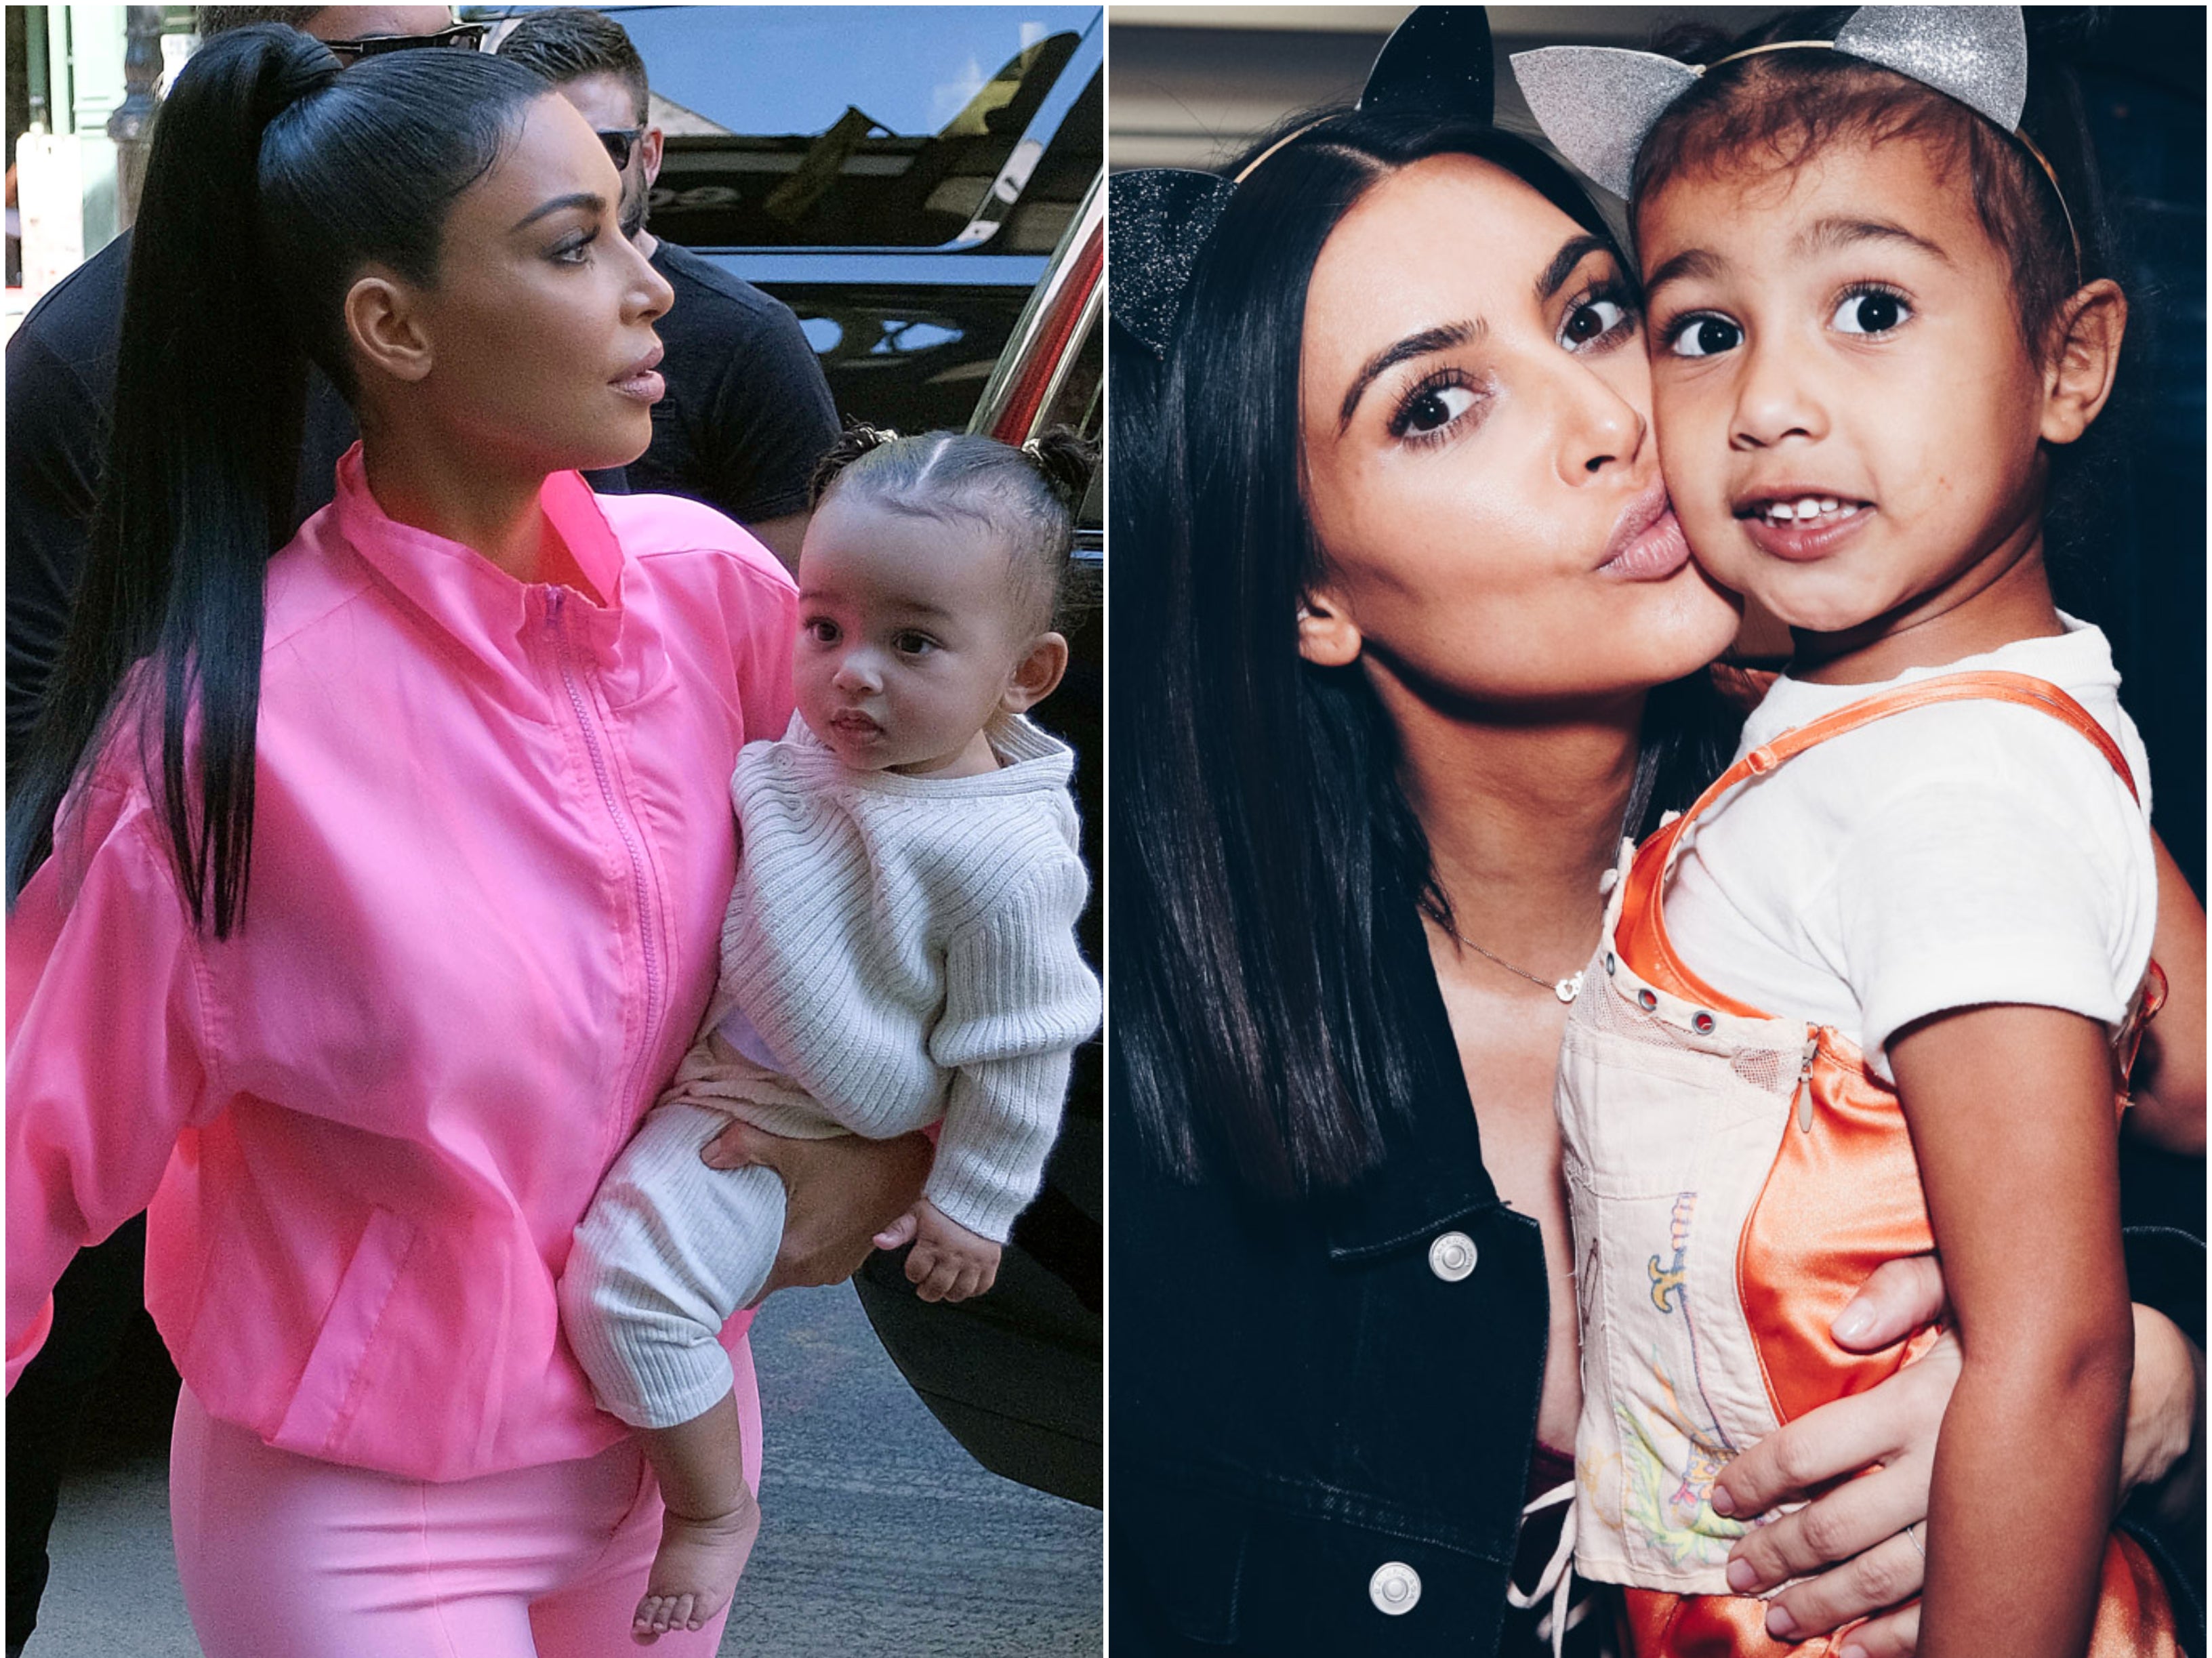 Kim Kardashian has two daughters, North and Chicago